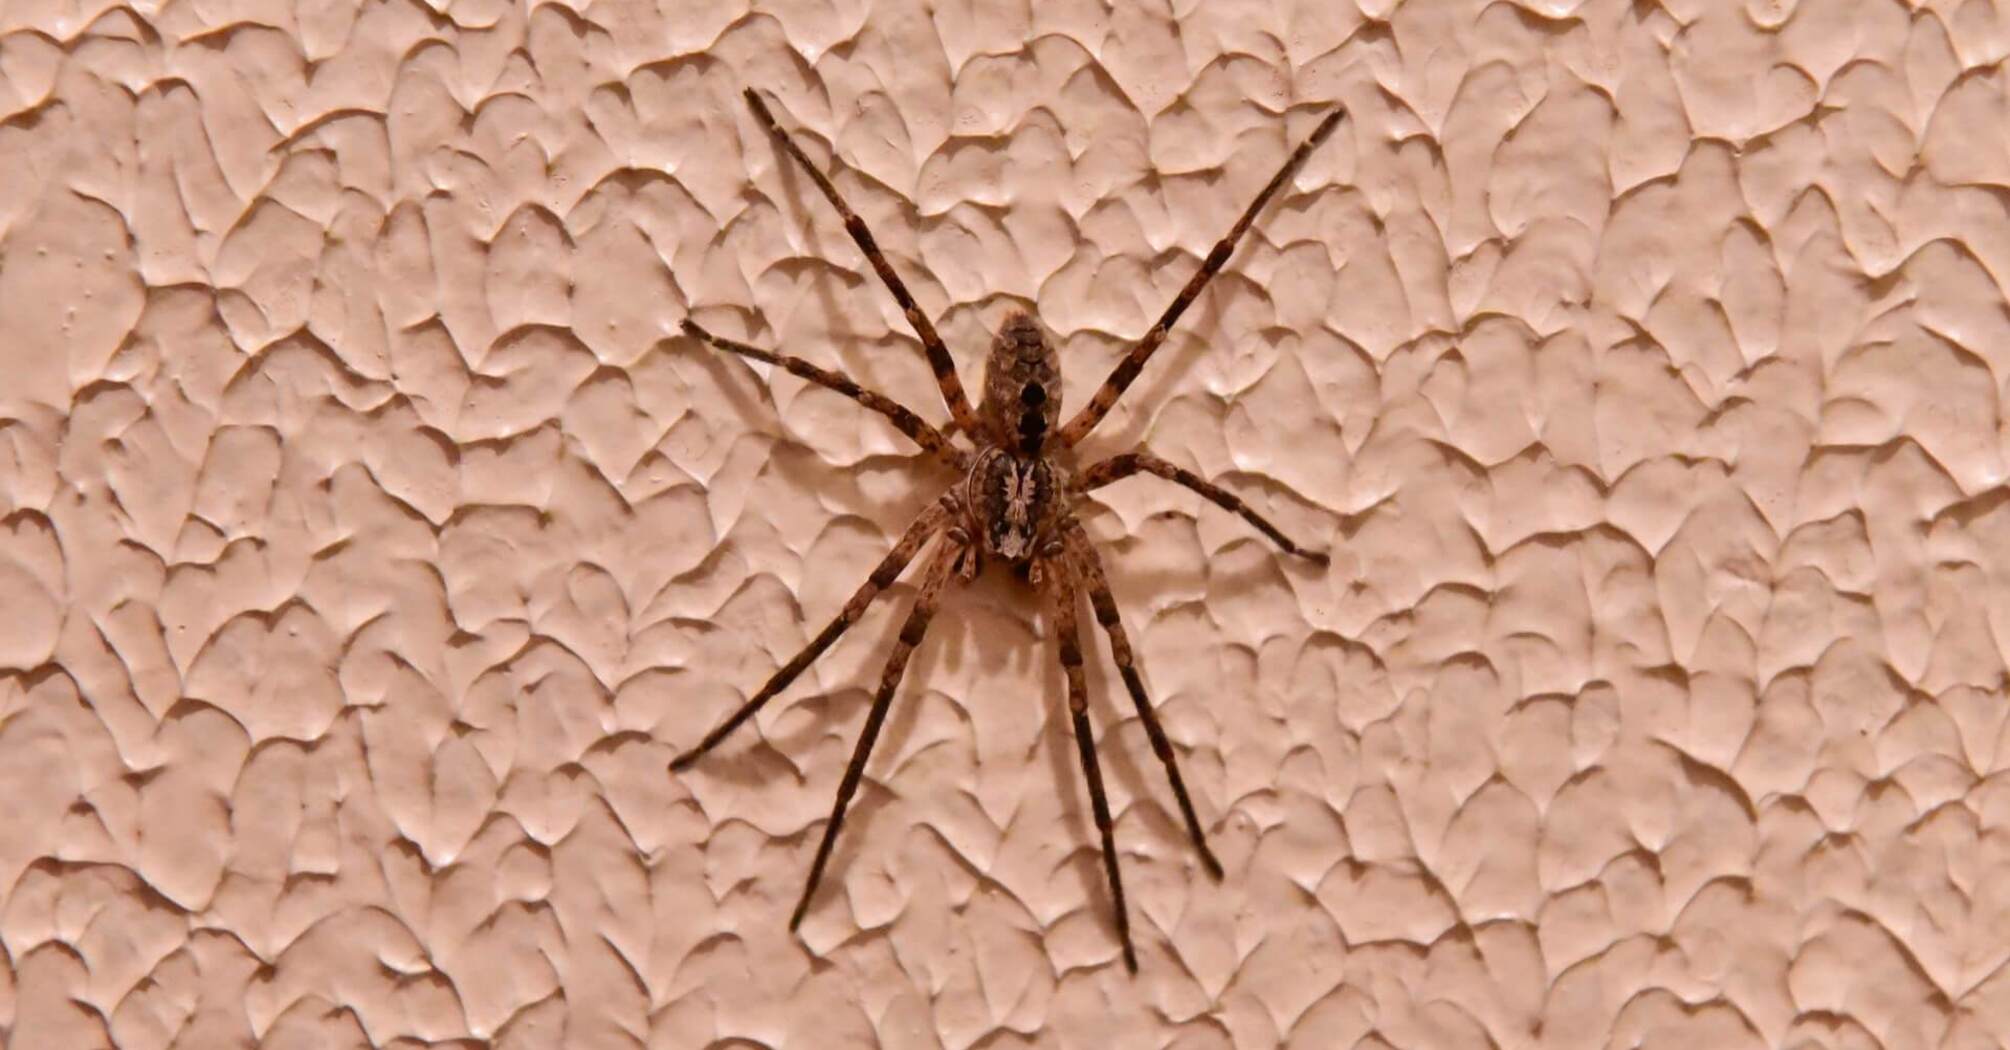 Signs of spiders in the house